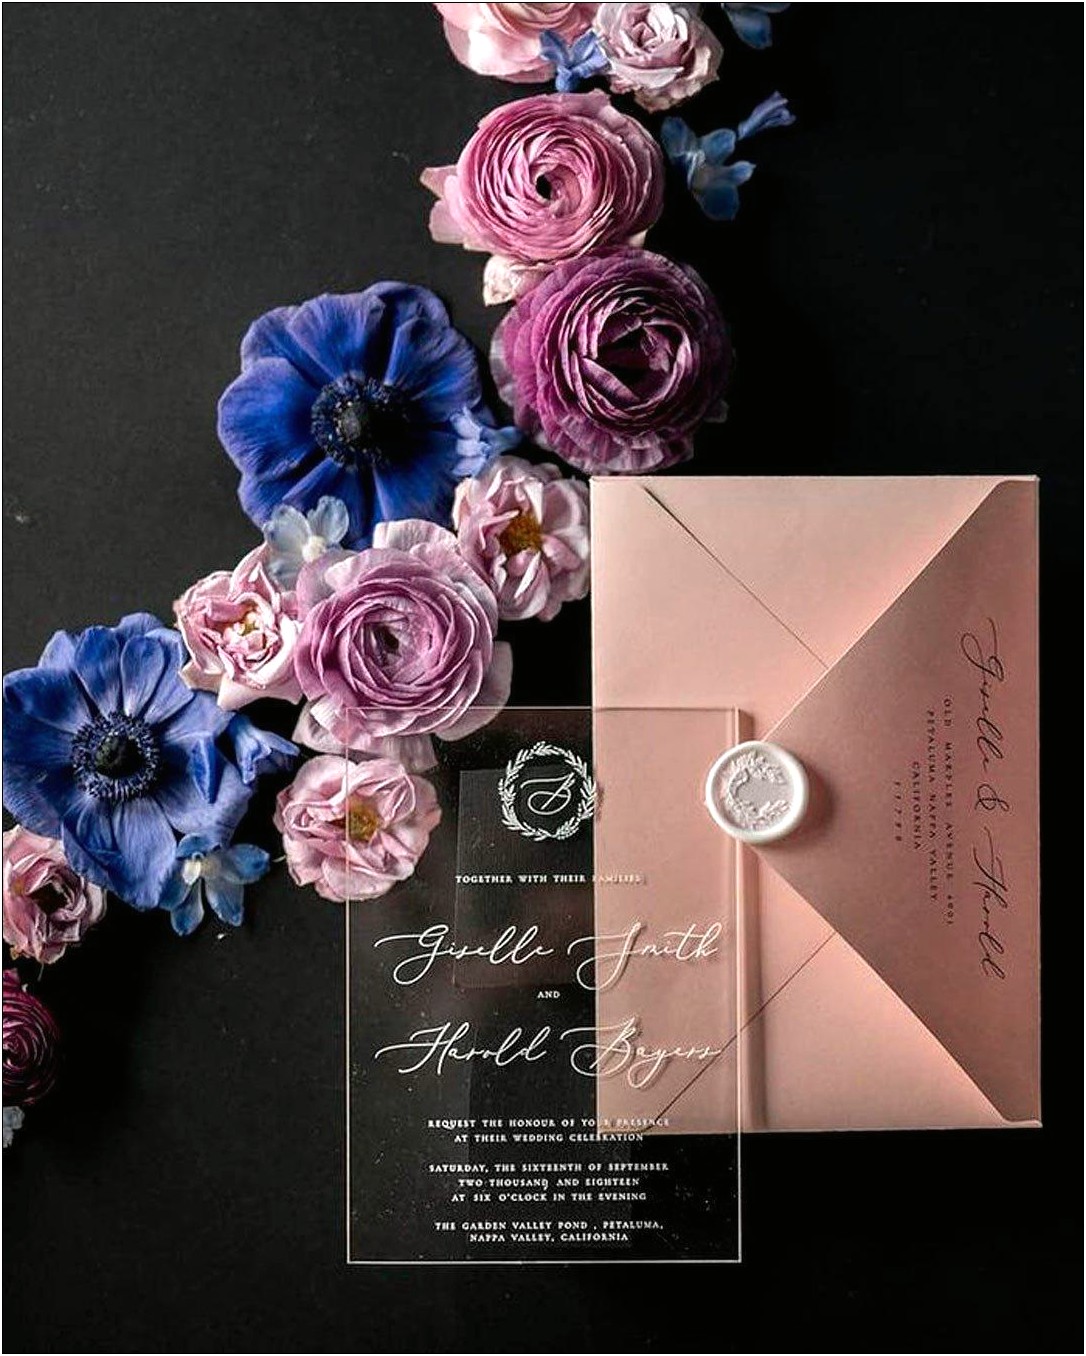 Addressing Wedding Invitations That Are Dark In Color